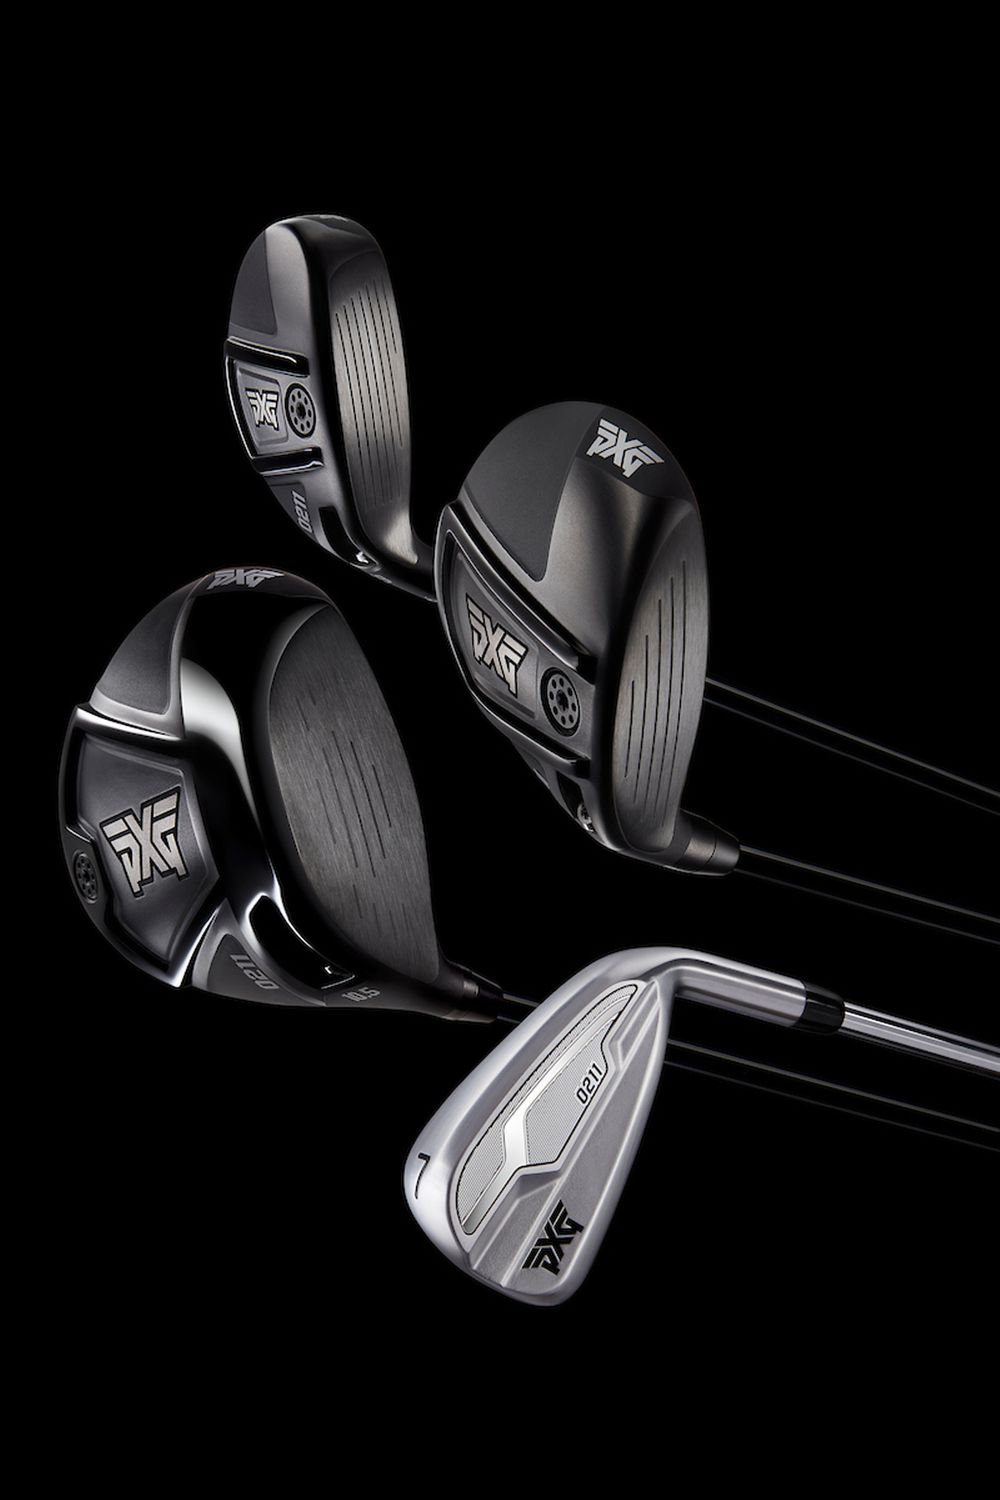 Image of golf clubs